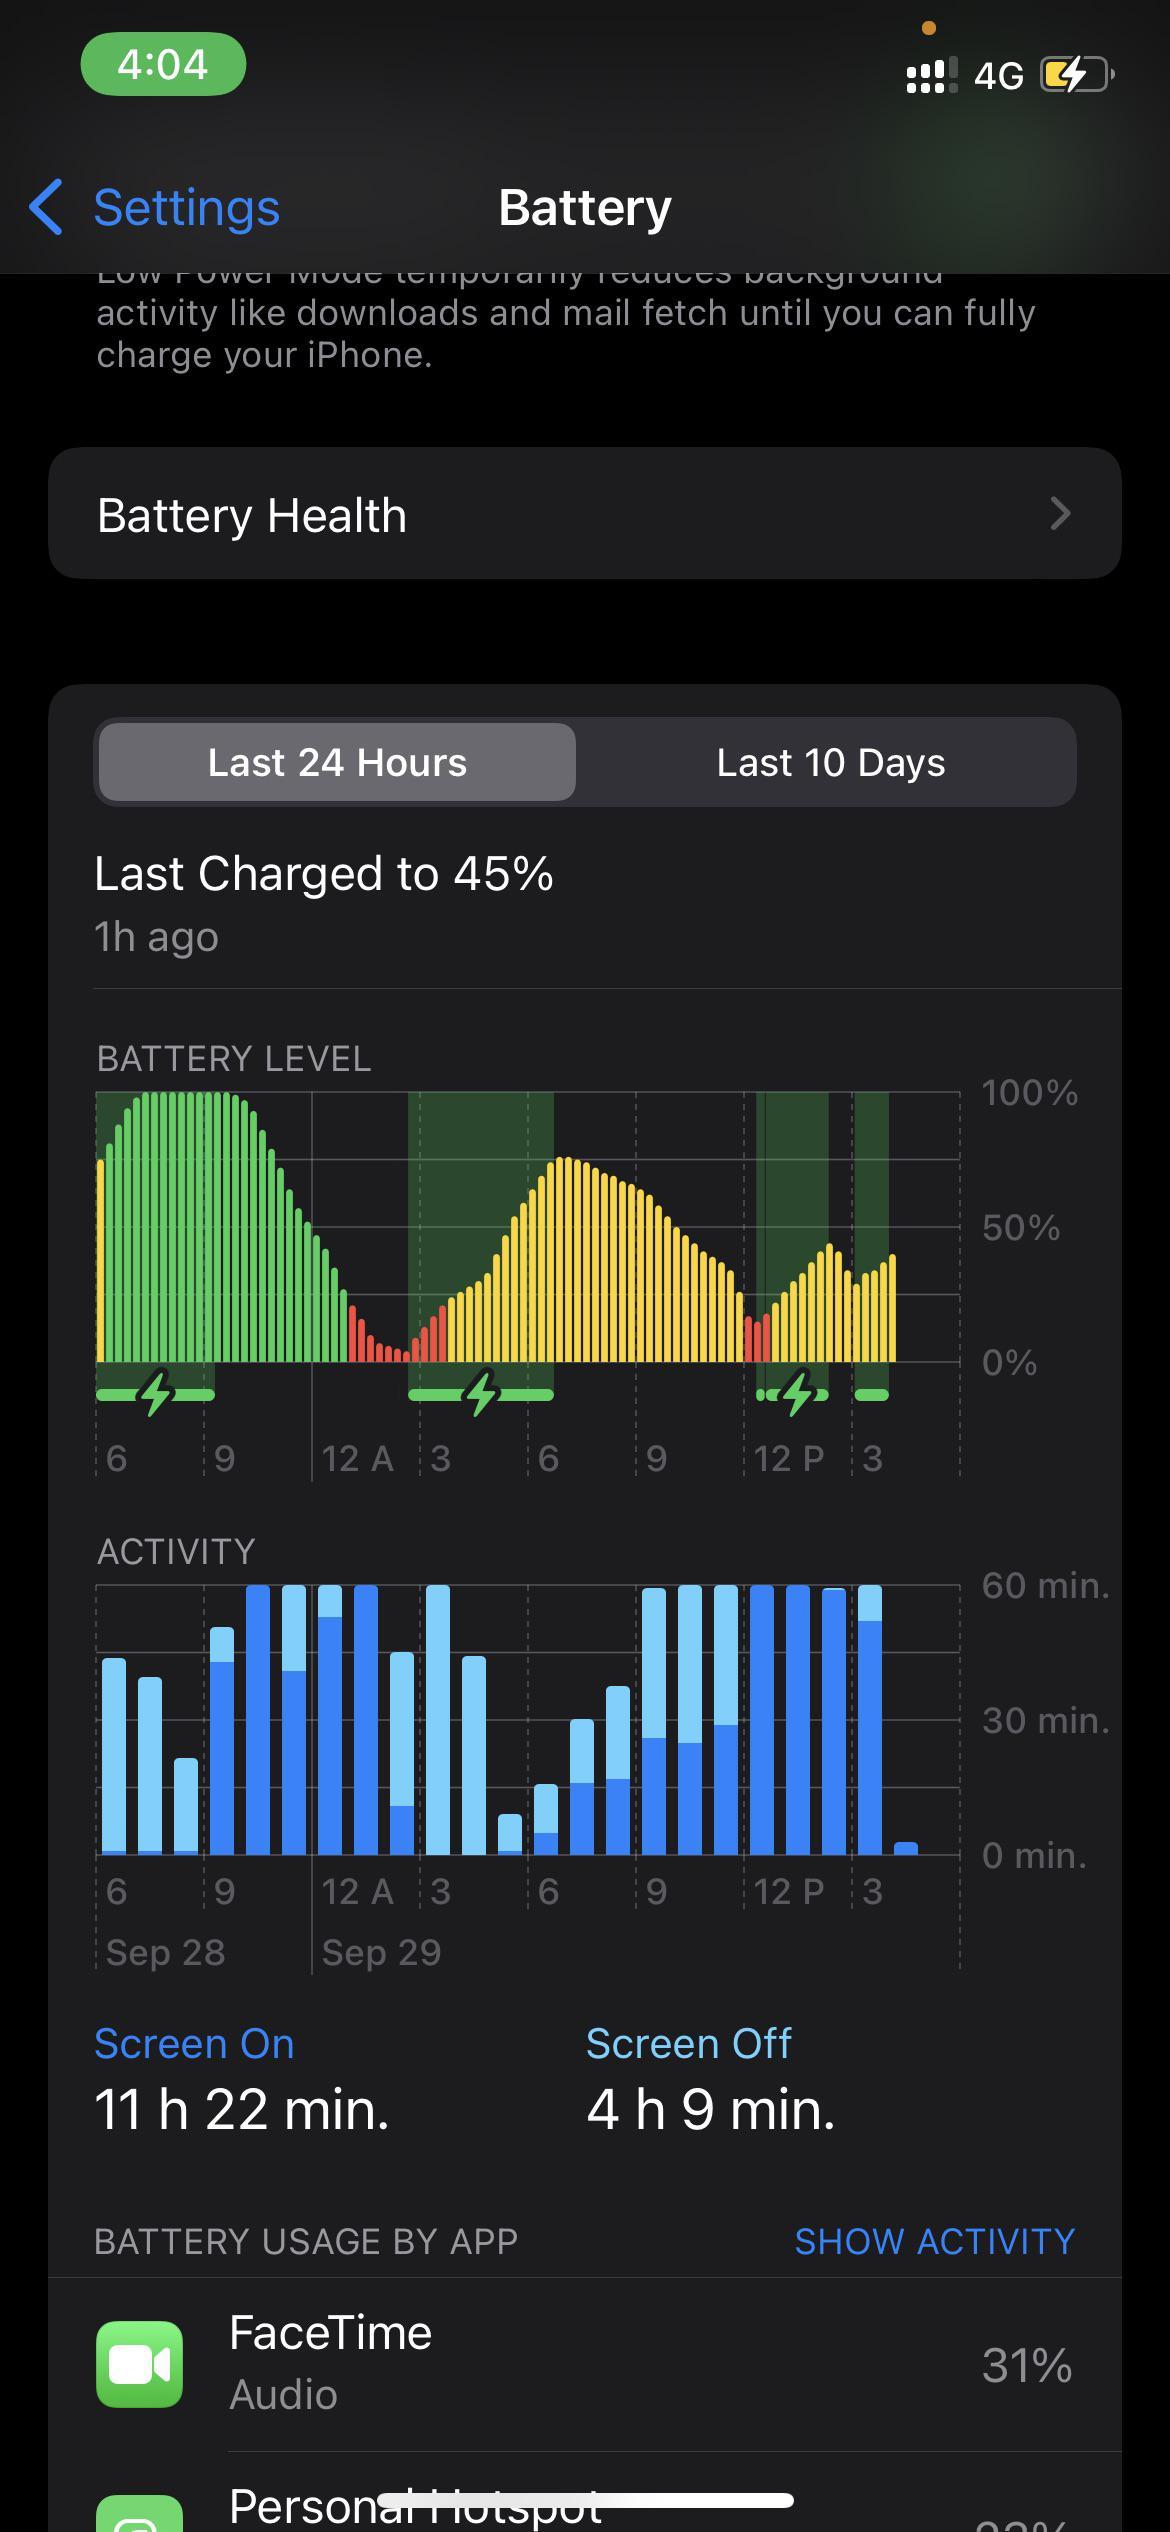 Read this now if iOS 15 ruined your iPhone’s battery life 